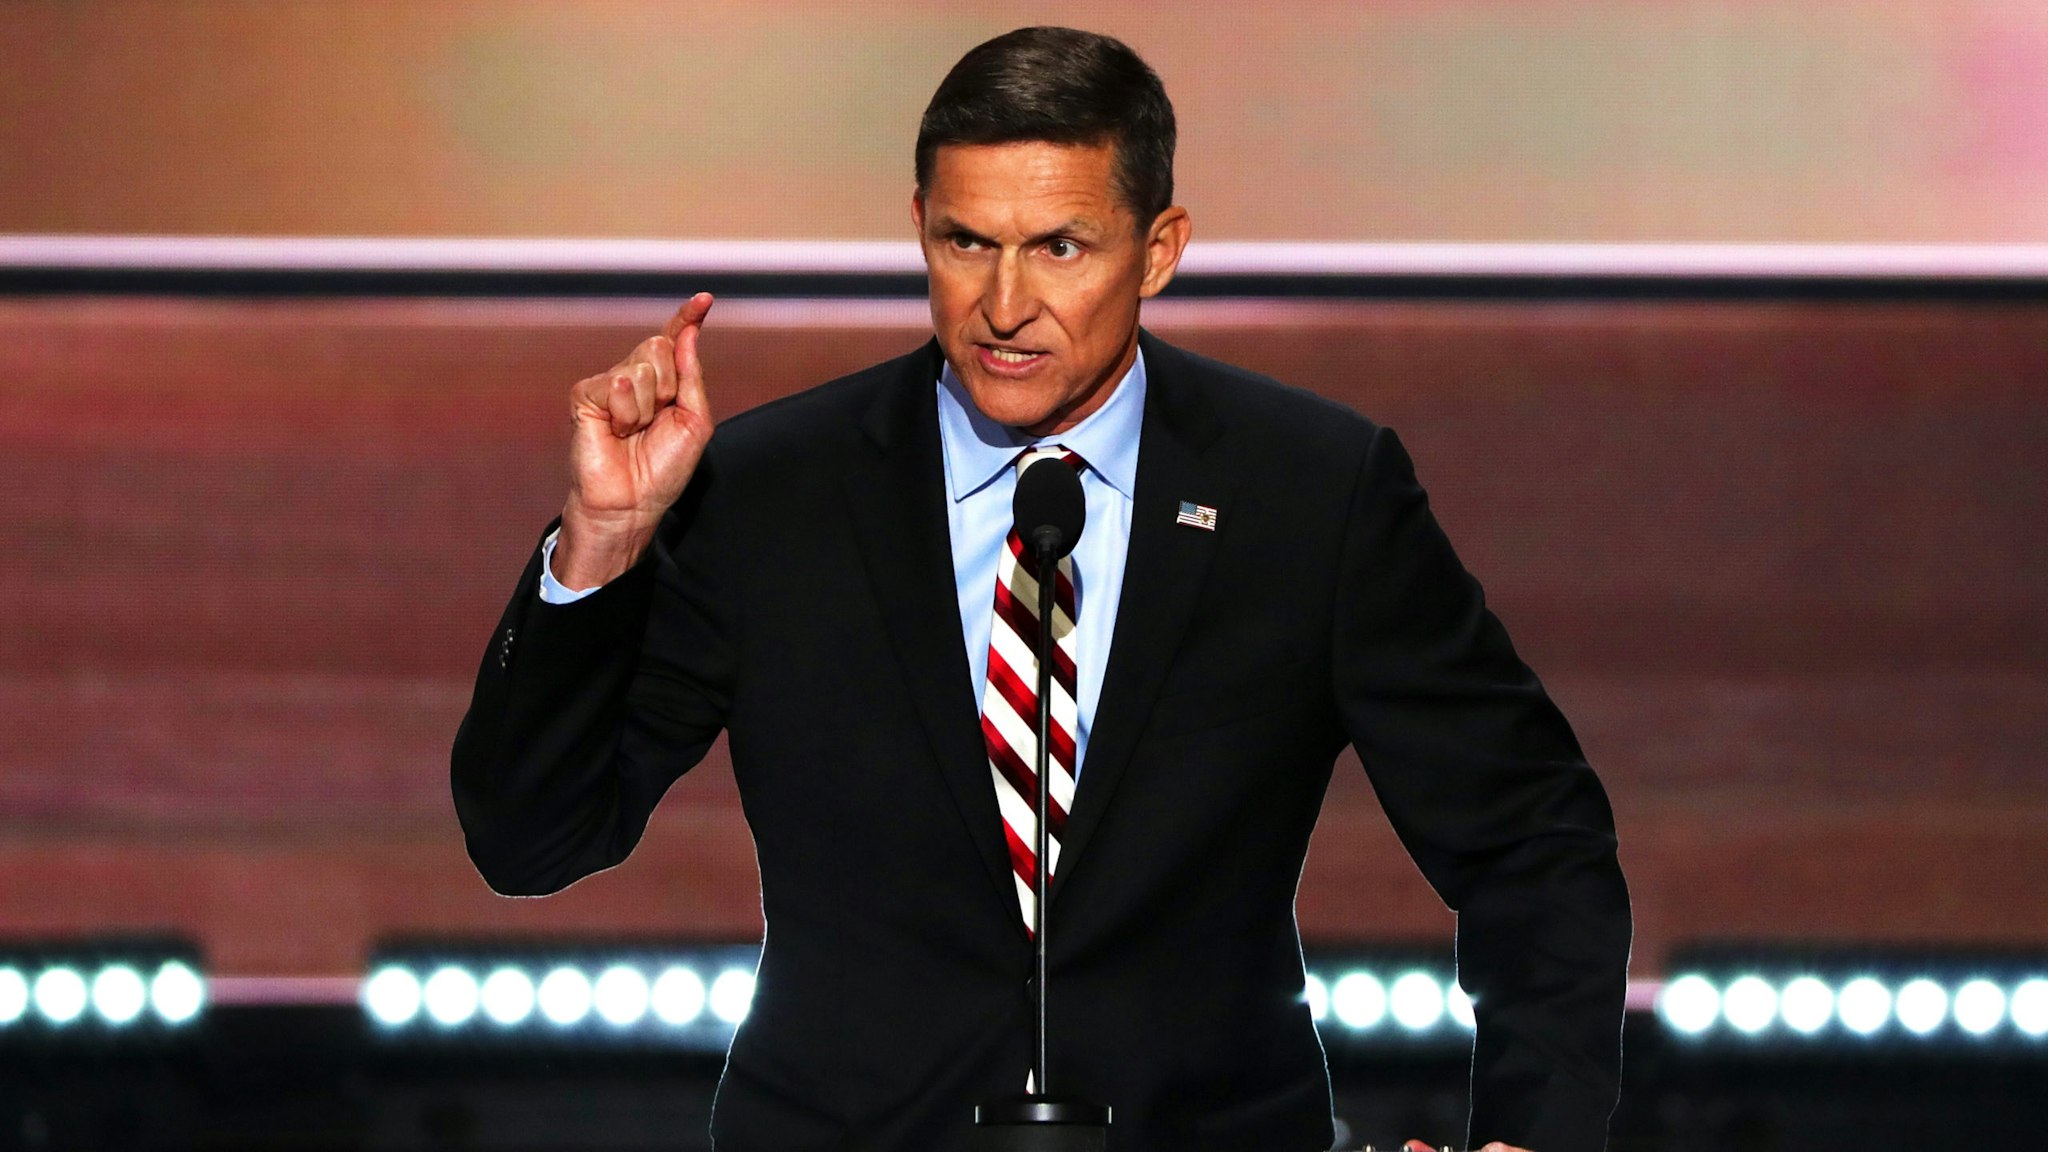 CLEVELAND, OH - JULY 18: Retired Lt. Gen. Michael Flynn delivers a speech on the first day of the Republican National Convention on July 18, 2016 at the Quicken Loans Arena in Cleveland, Ohio. An estimated 50,000 people are expected in Cleveland, including hundreds of protesters and members of the media. The four-day Republican National Convention kicks off on July 18.